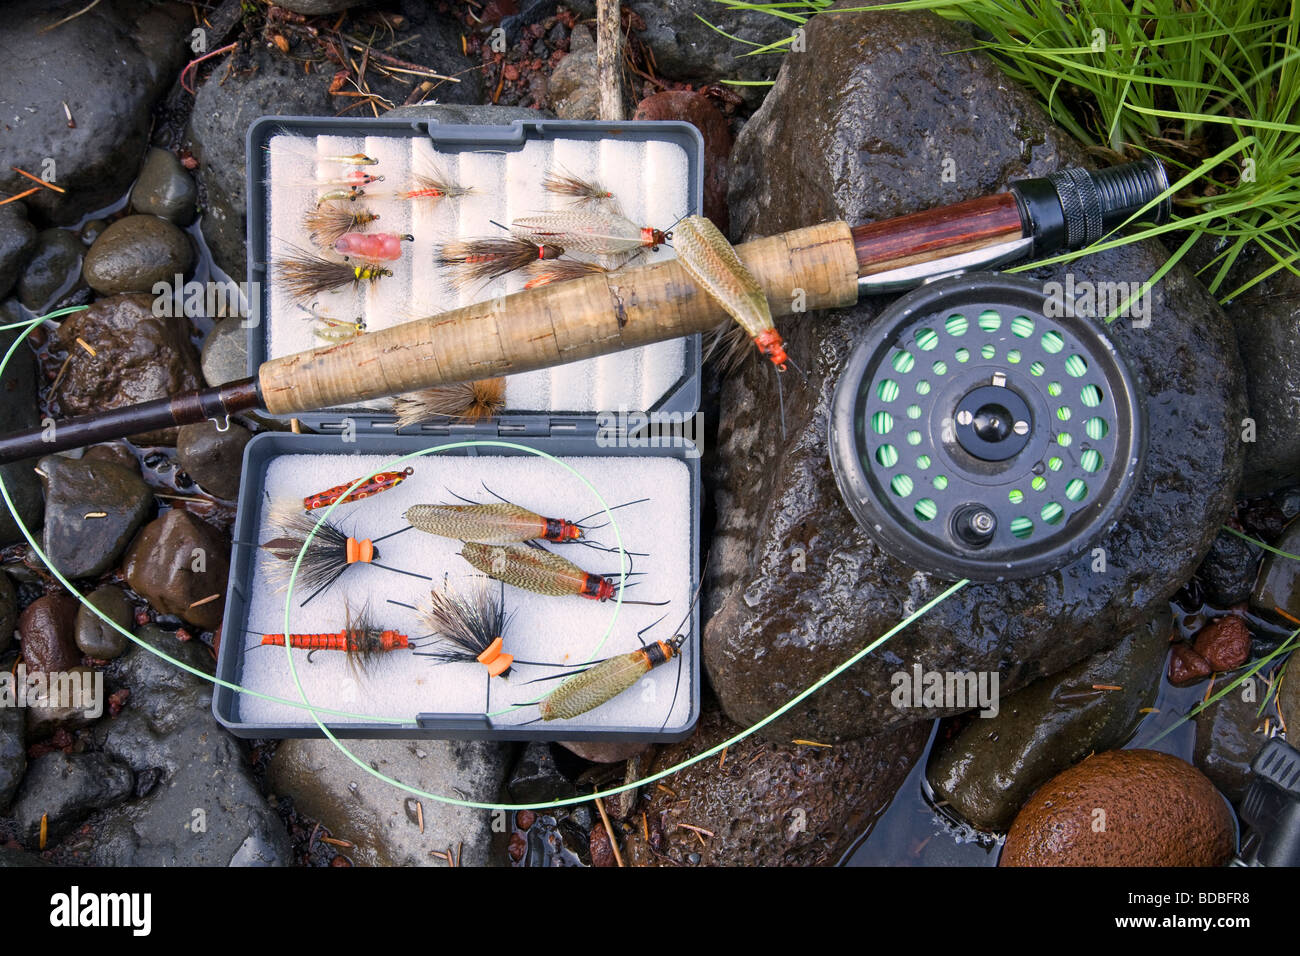 A fly rod, fly reel, trout fishing net, and box of artificial flies used for fly fishing for trout and steelhead Stock Photo